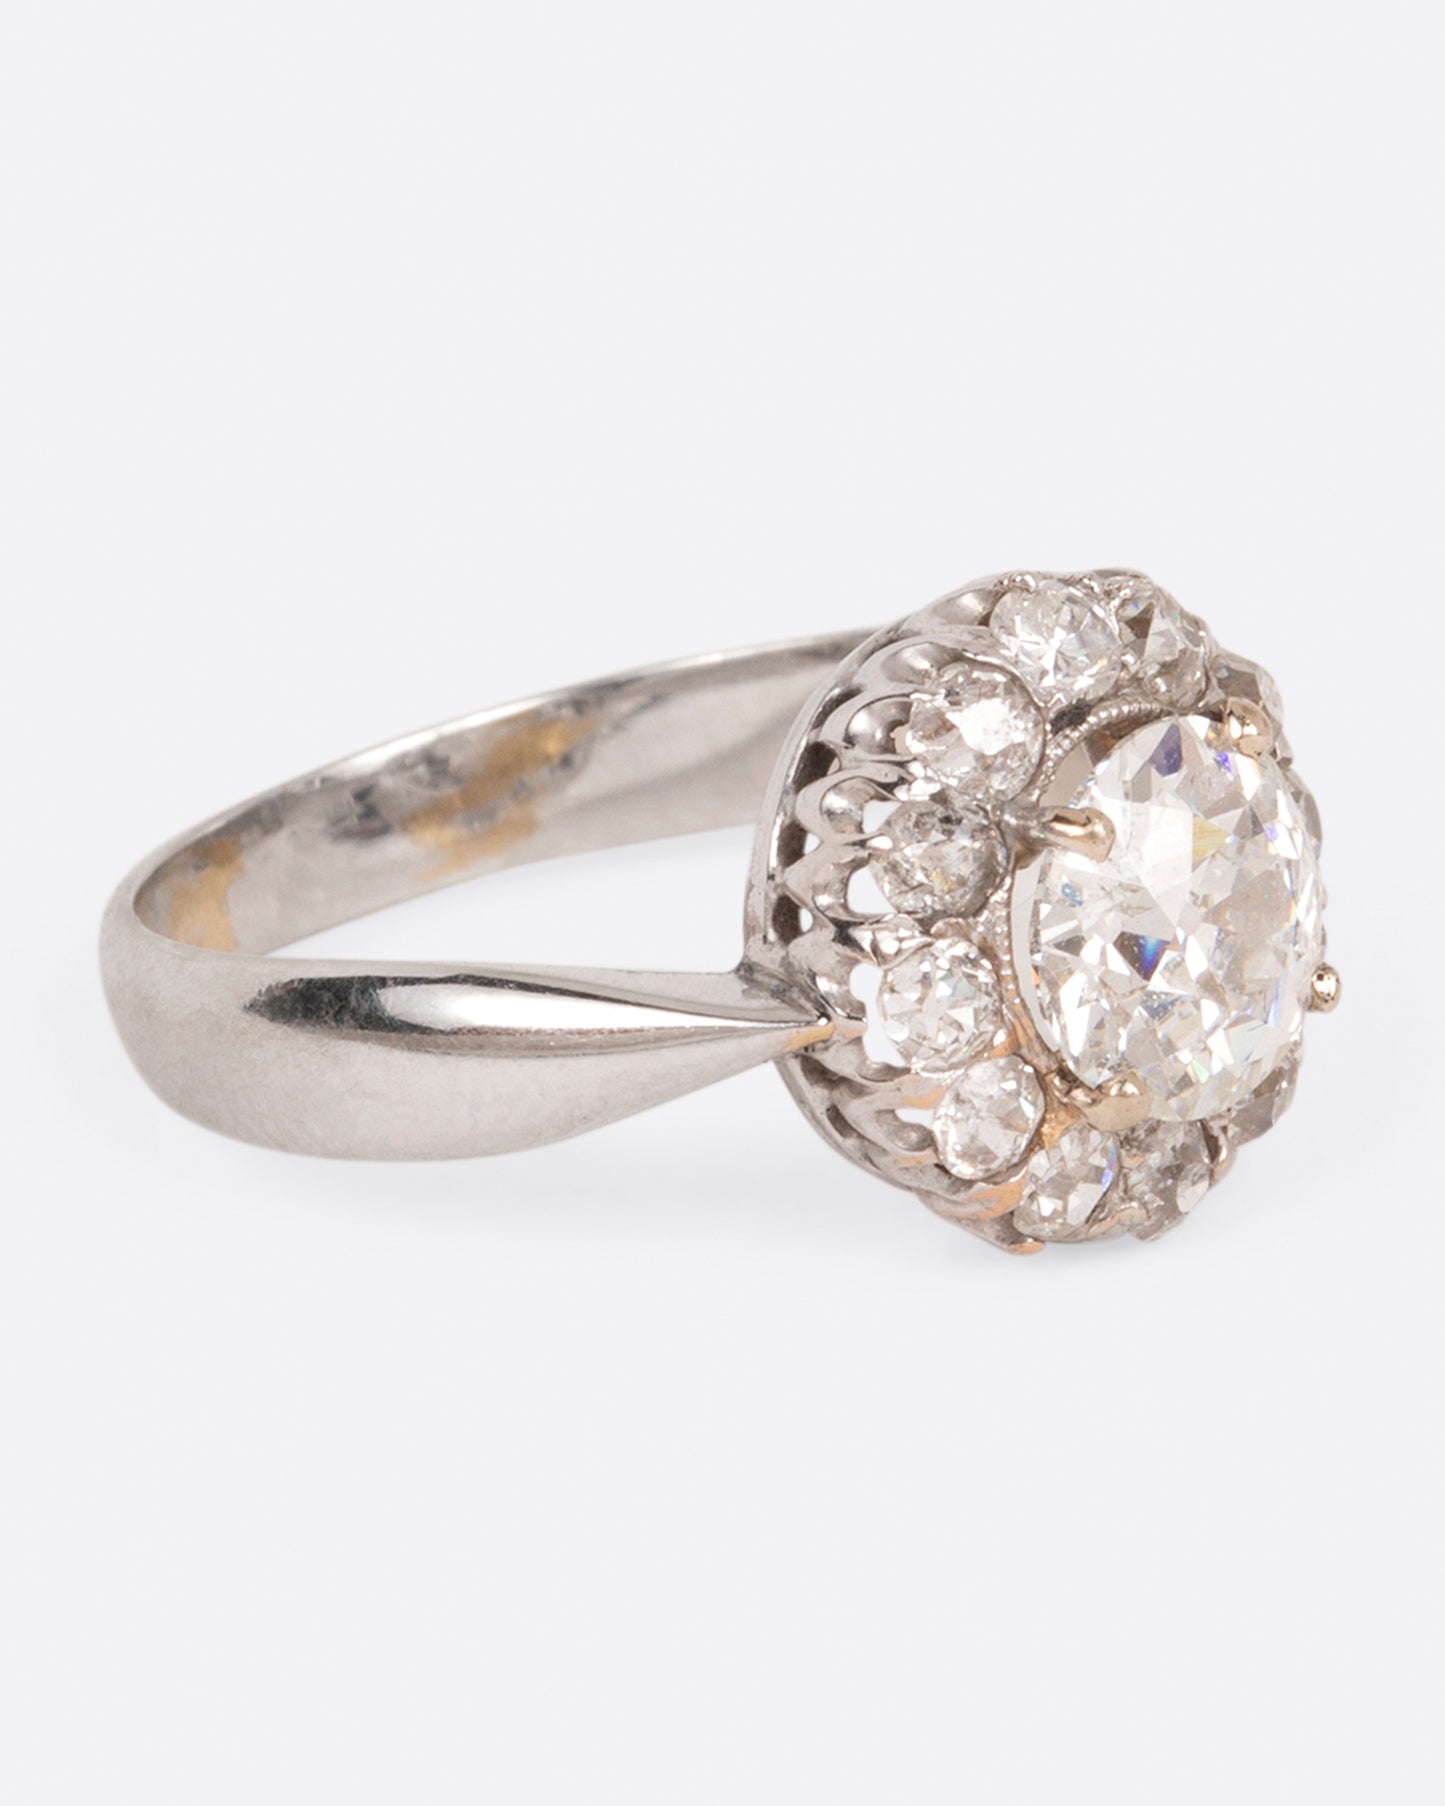 A white gold ring with a tapered band and a flower-shaped cluster of diamonds, shown from the side.